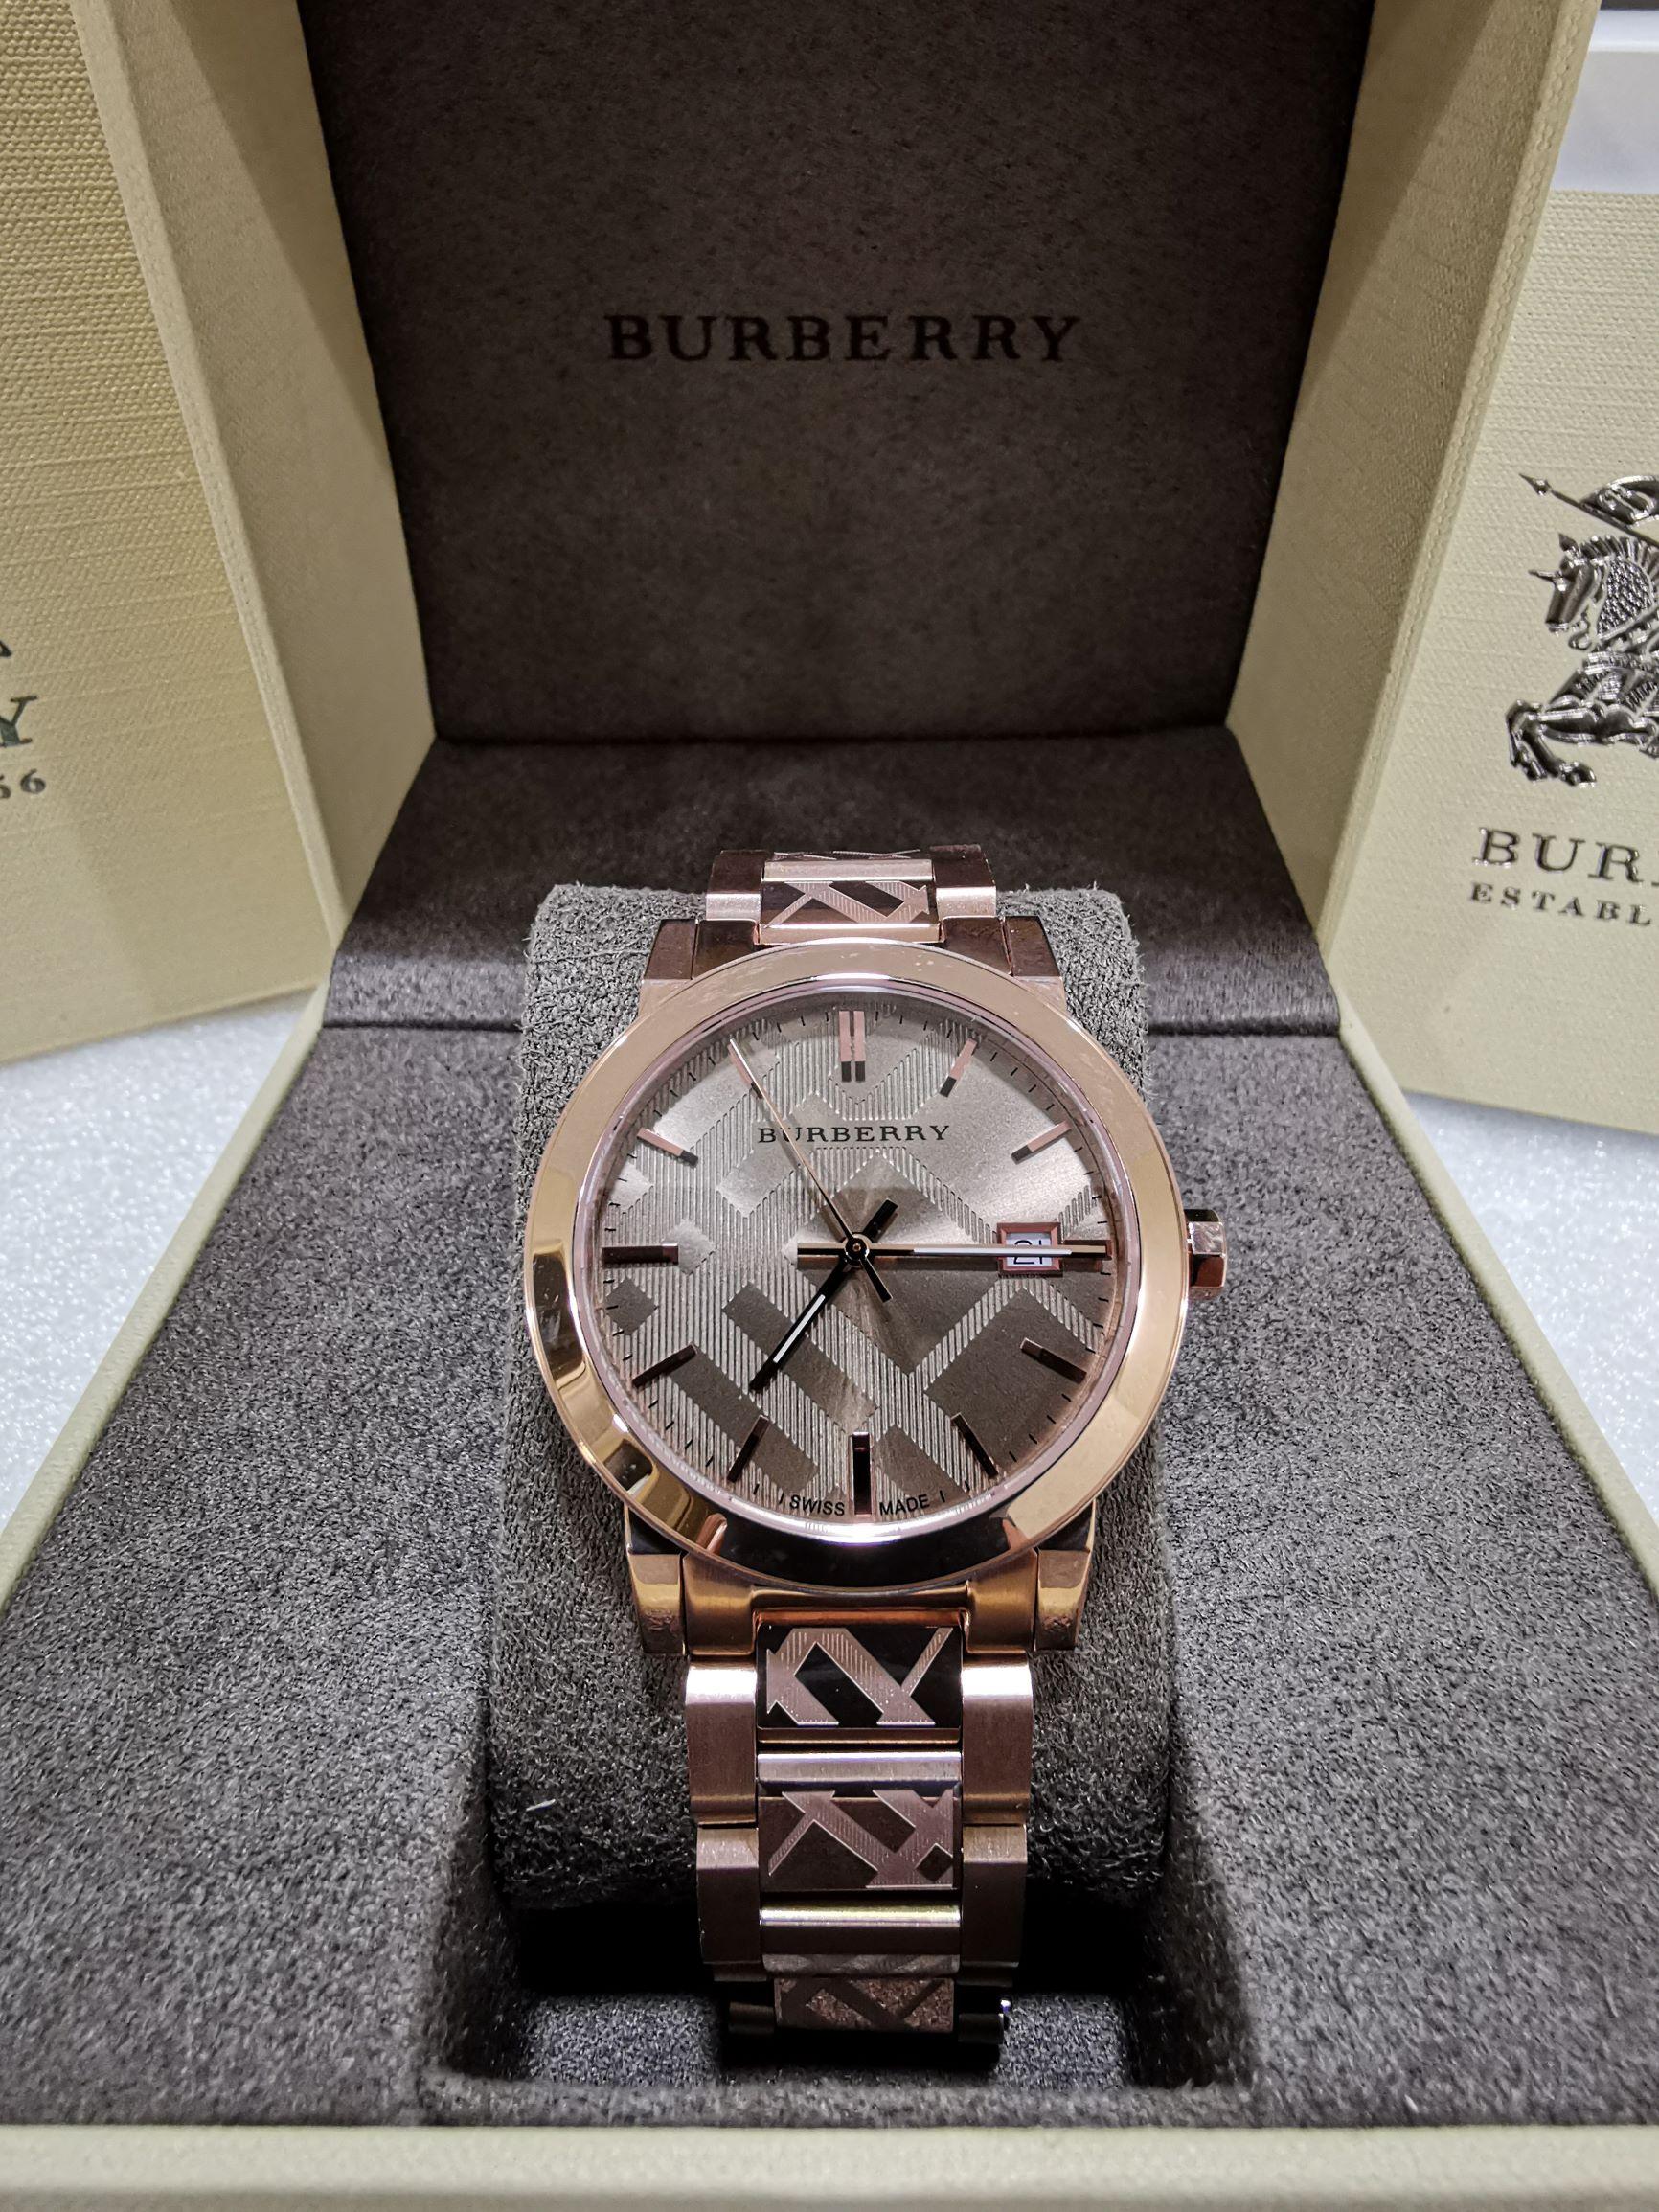 Burberry Watches Women Norway, SAVE 60% 